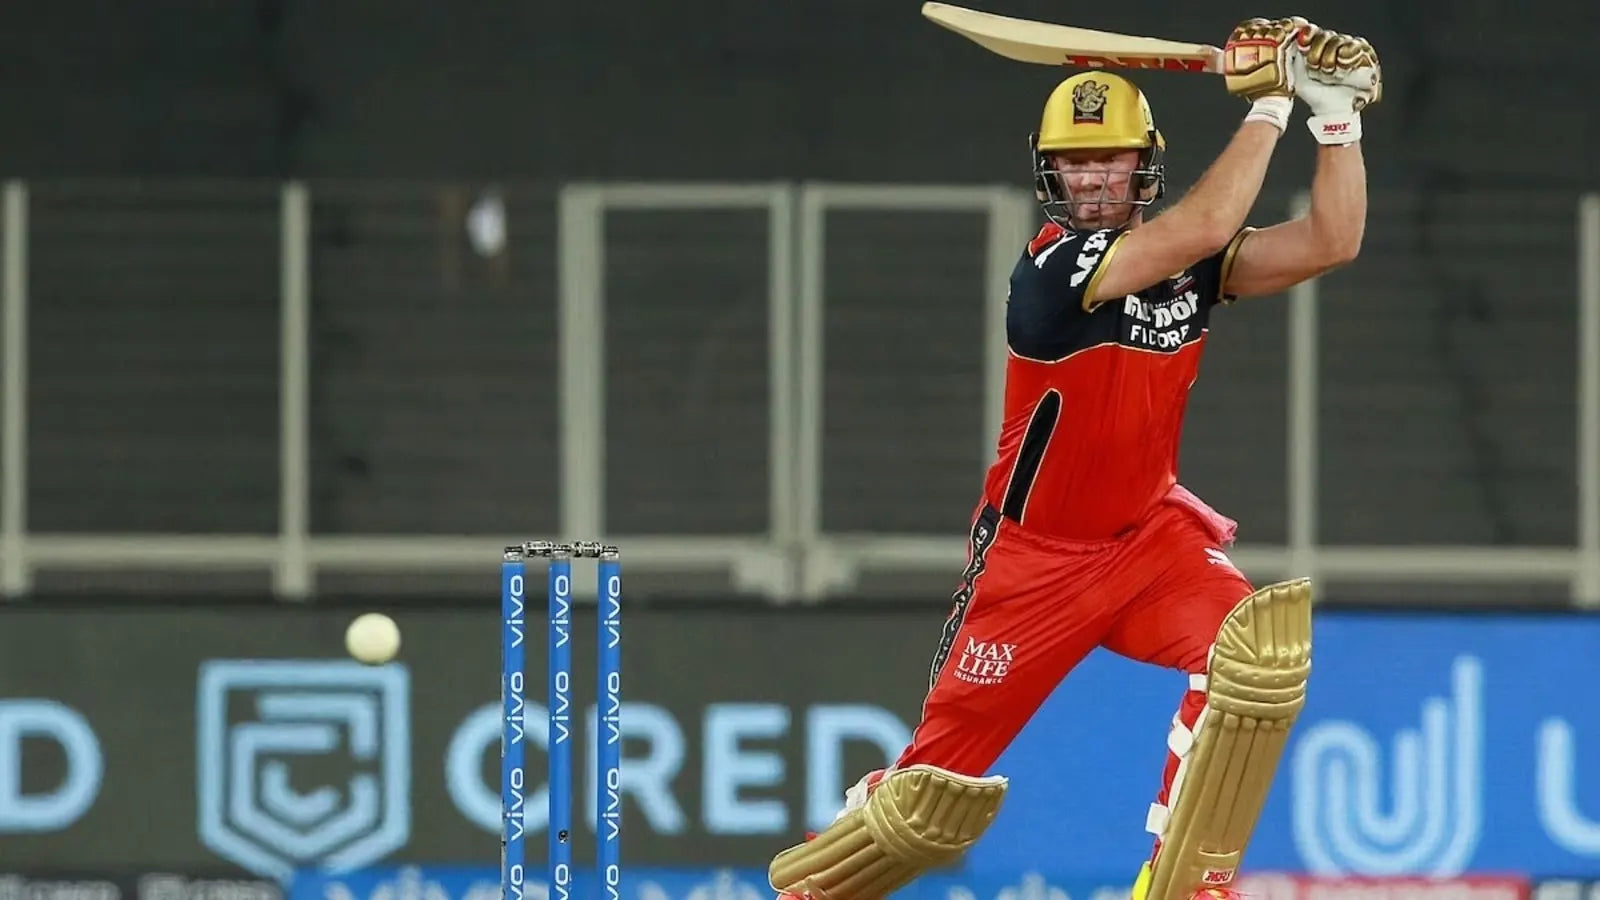 AB de Villiers Batting for the Royal Challengers Bangalore (RCB) in the IPL